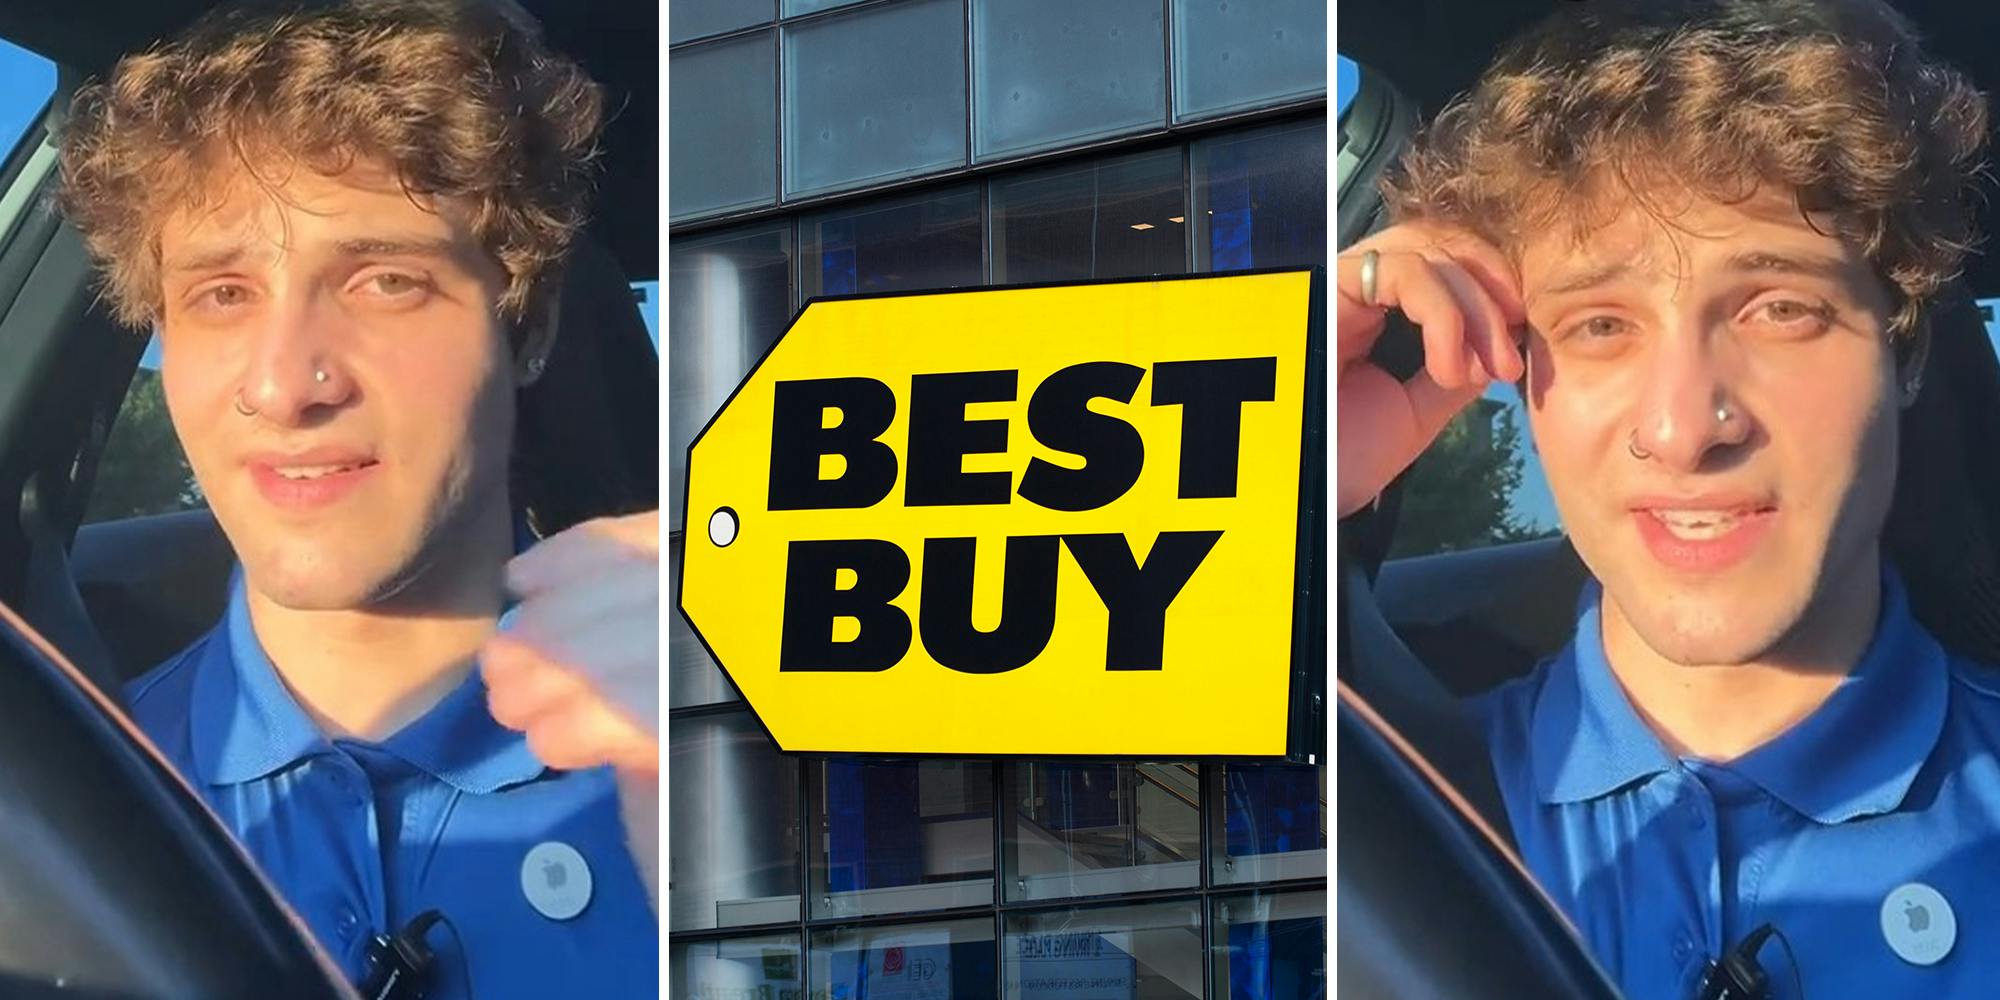 Best Buy worker thinks Apple may be giving the good phones to people who buy AppleCare so they don’t have to use it